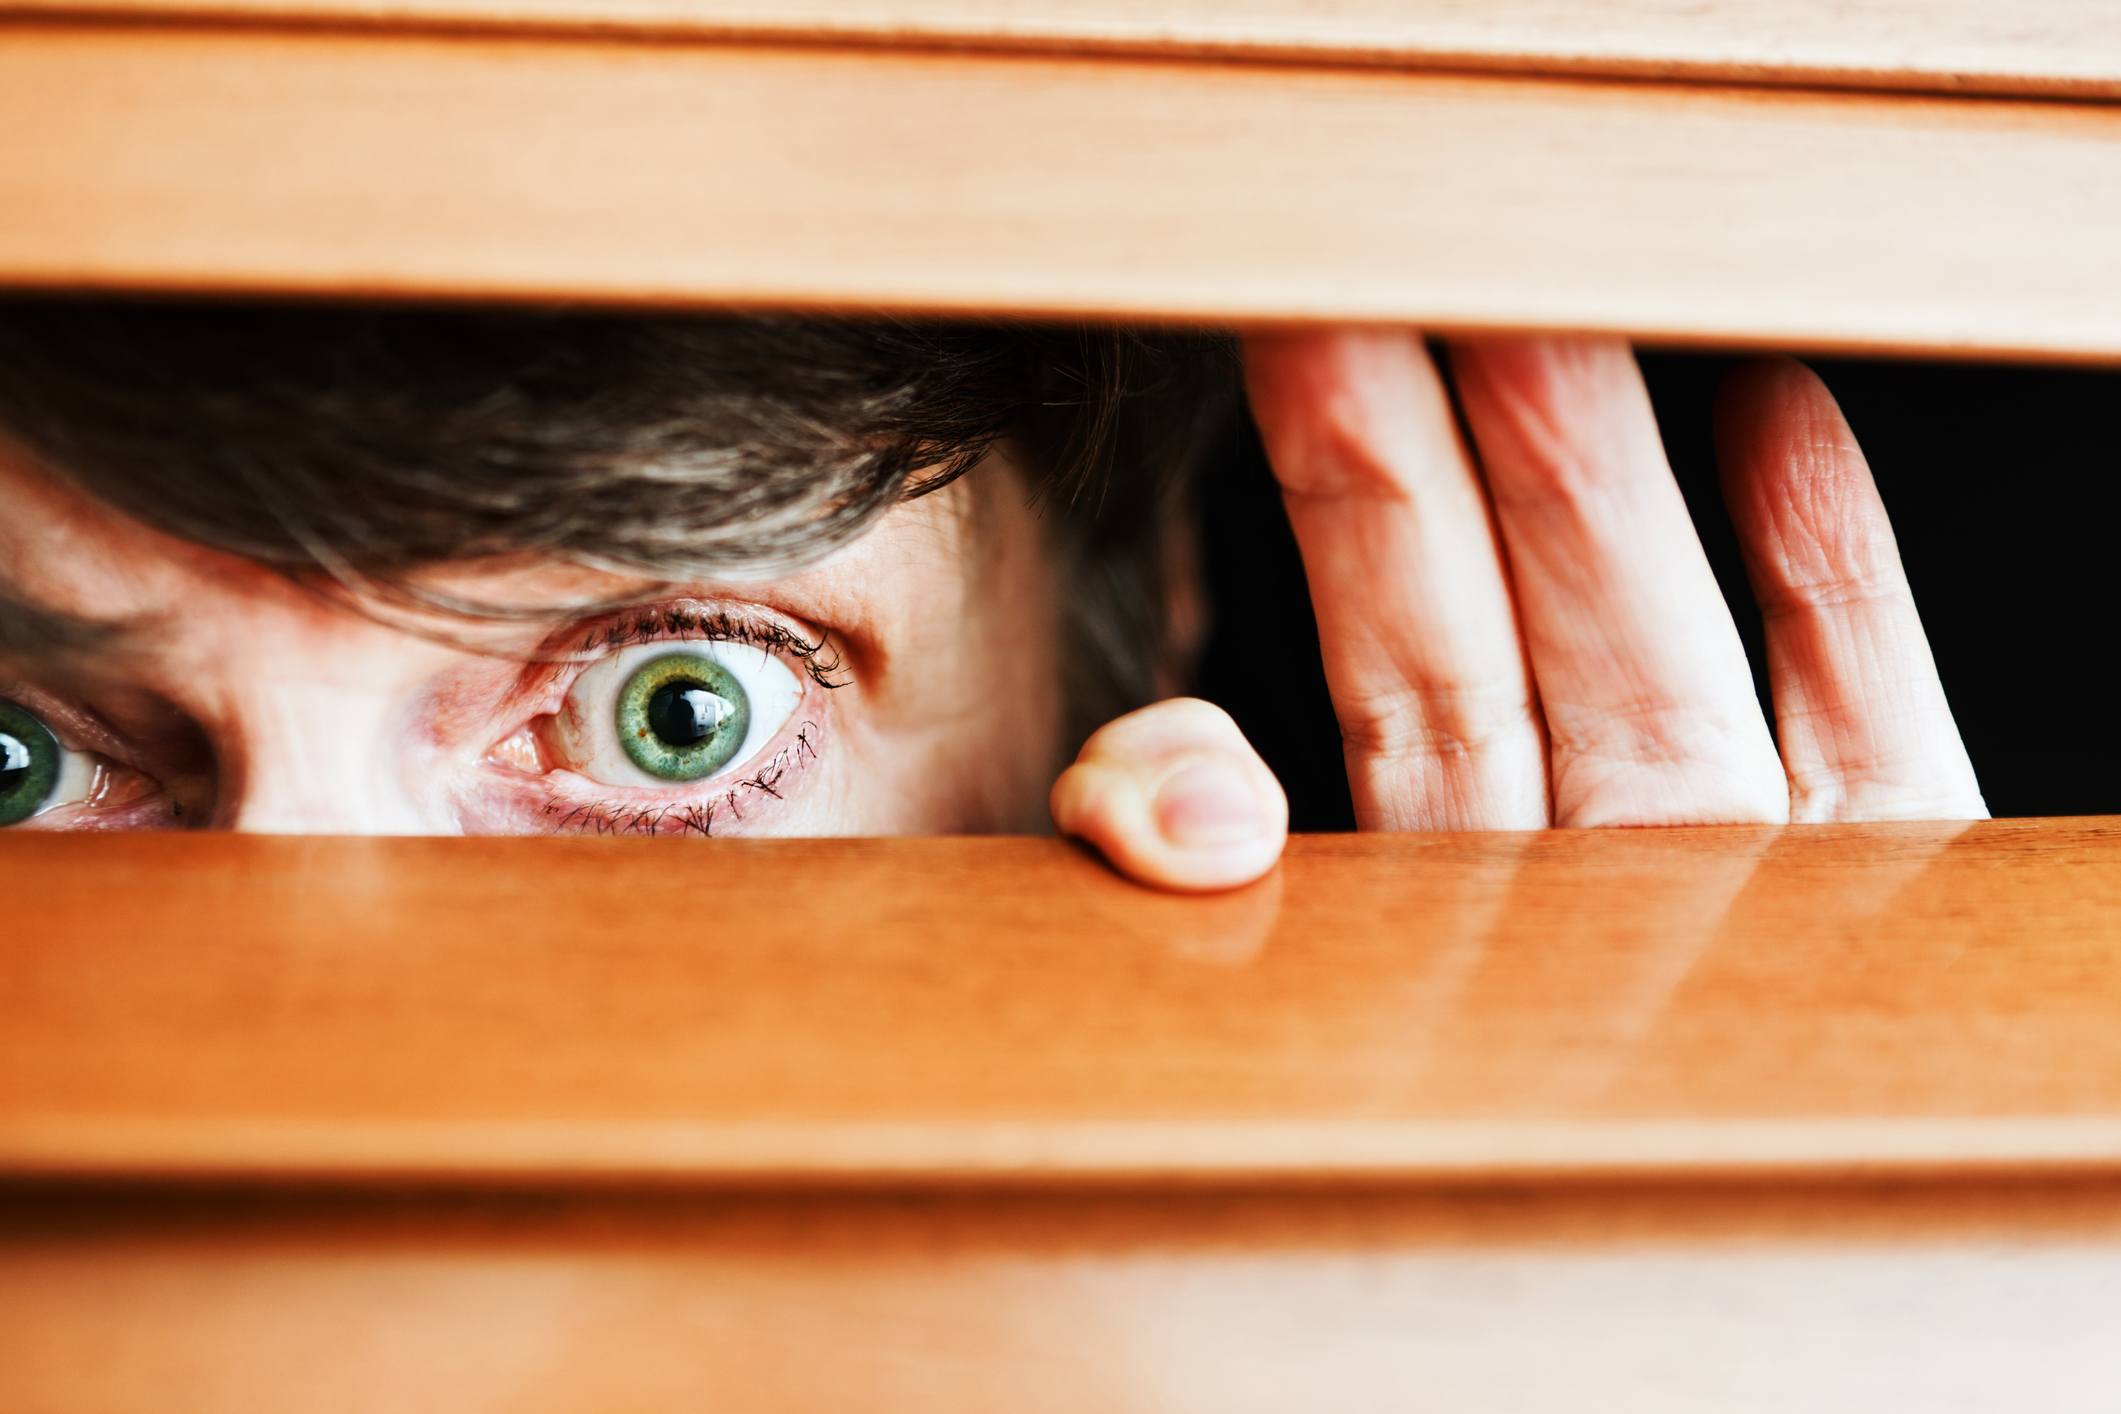 15 Things Your Neighbor Secretly Knows About You